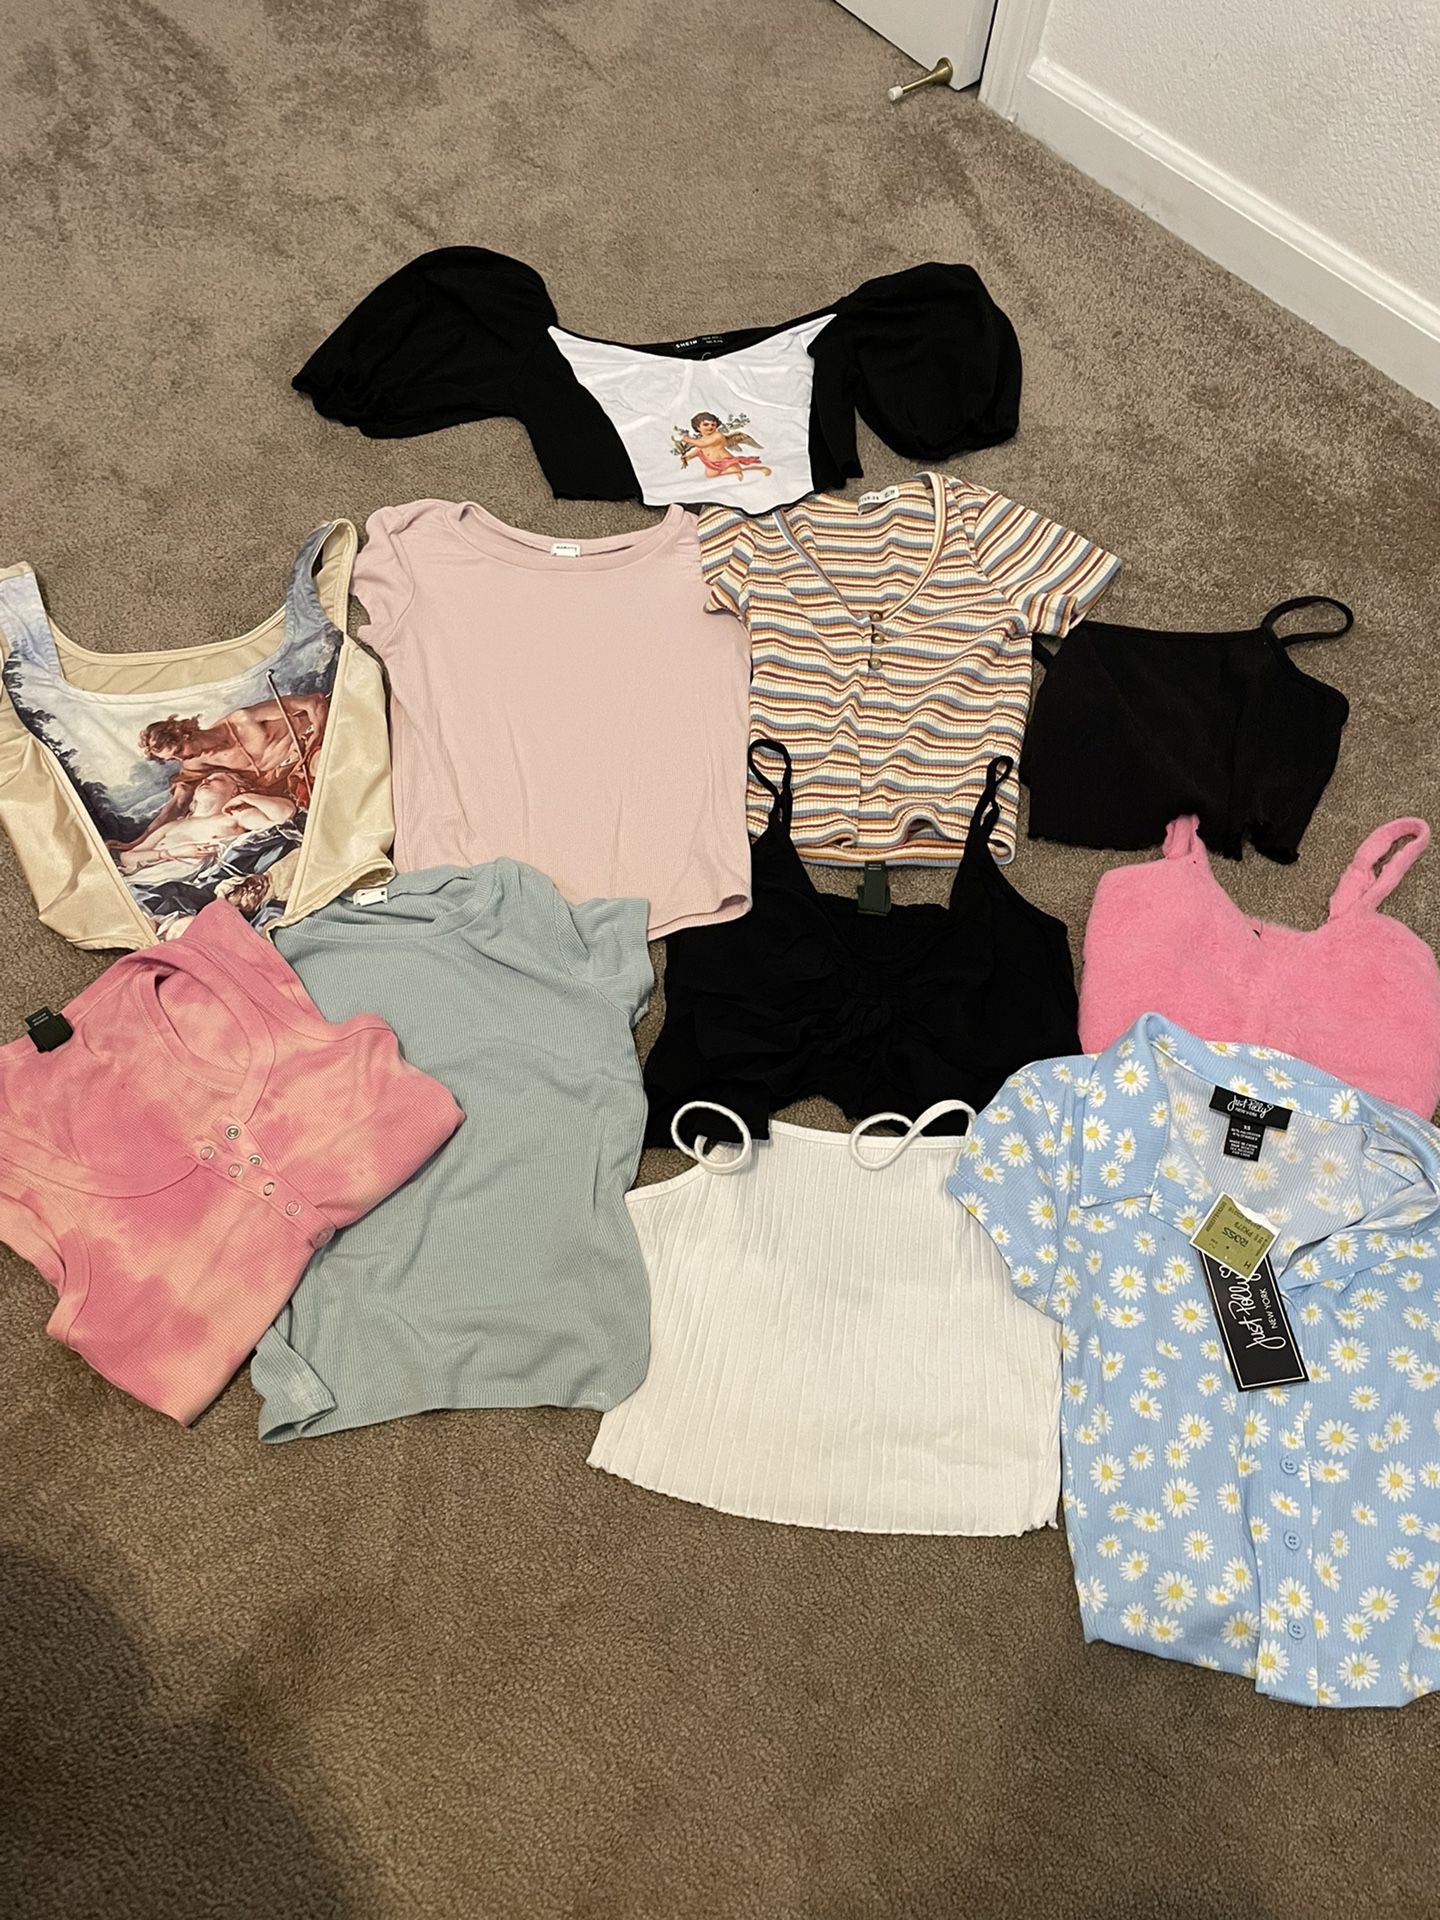 11 women’s extra small tanks and crop tops